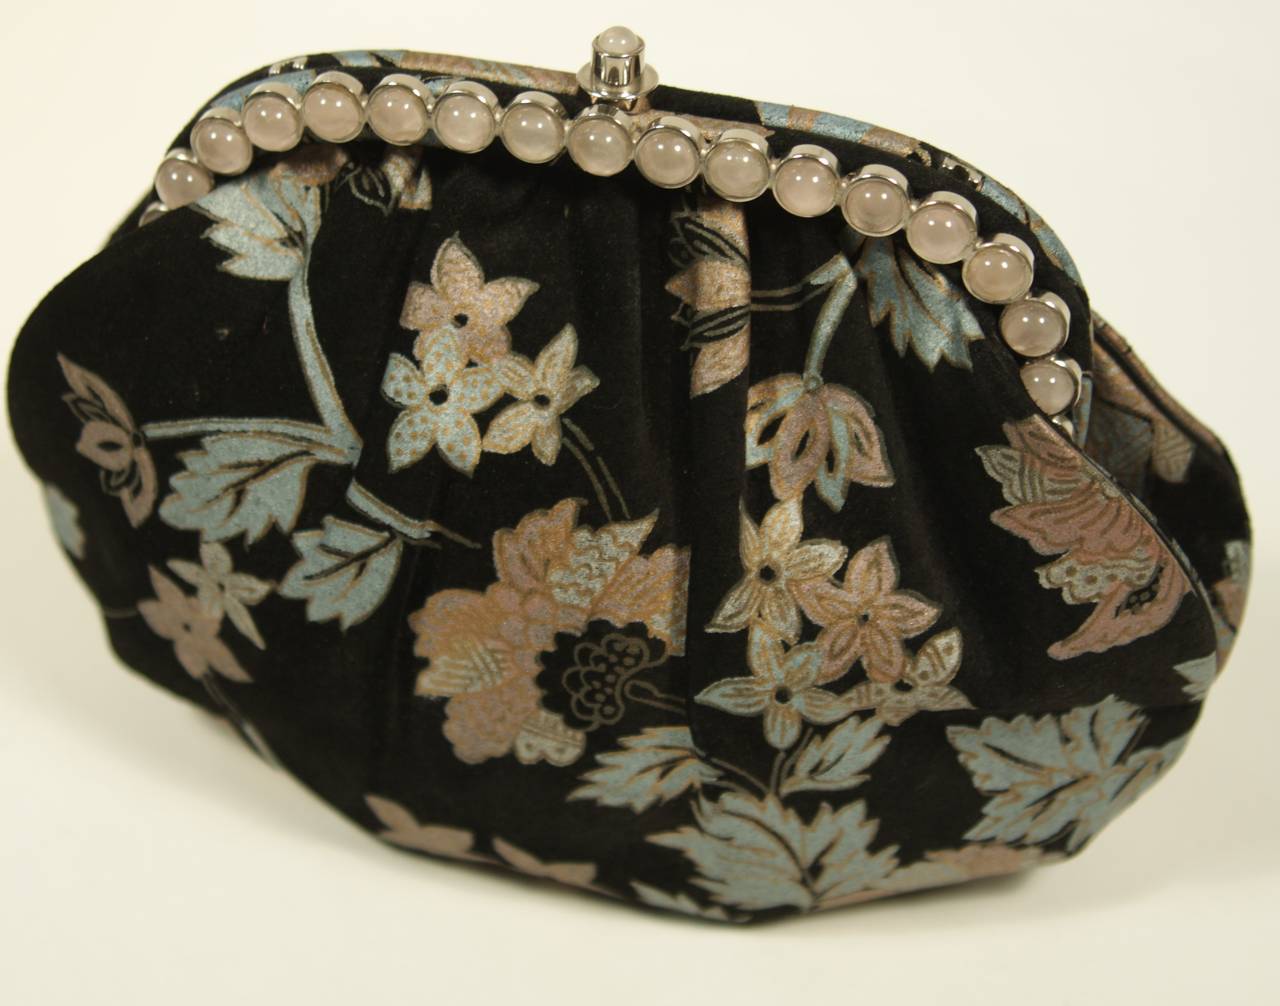 This wonderful Judith Leiber design is available for viewing at our Beverly Hills Boutique. The bag is fashioned from a black suede featuring a printed floral motif and accented by lovely pink stones. The interior is silk lined and in excellent